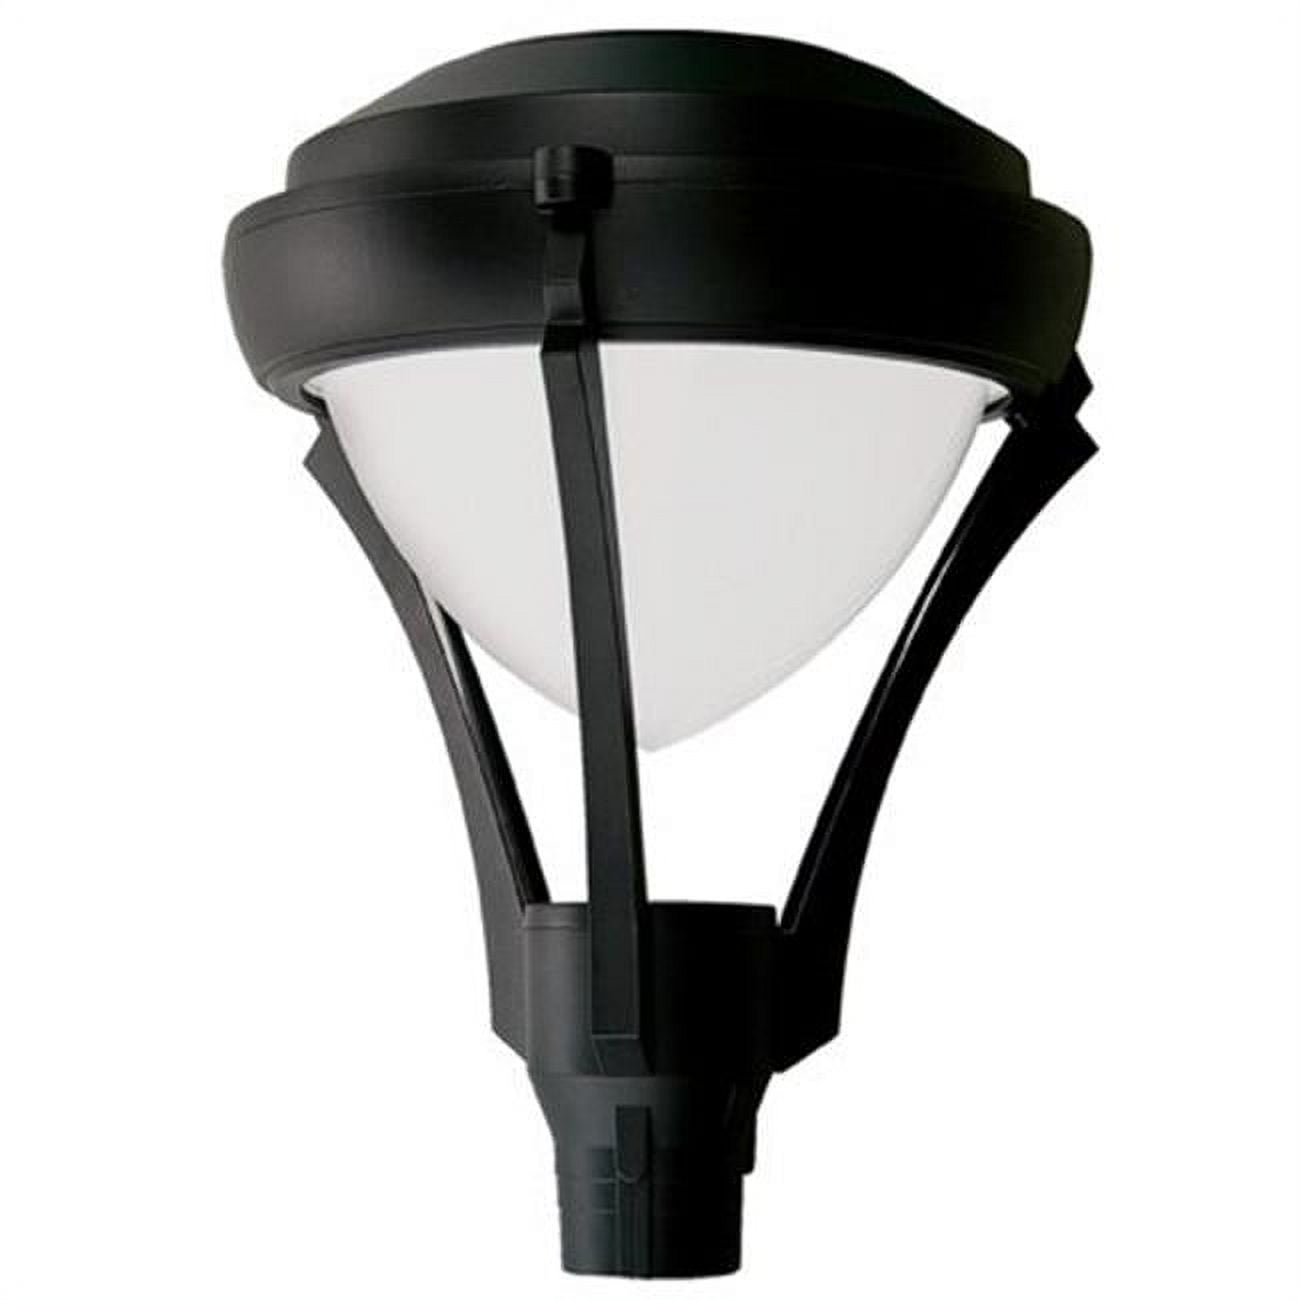 Picture of Dabmar Lighting GM591-B 50W 120V Powder Coated Cast Aluminum Post Top Light Fixture with High Pressure Sodium Lamp, Black - 27.95 x 21.65 x 21.65 in.